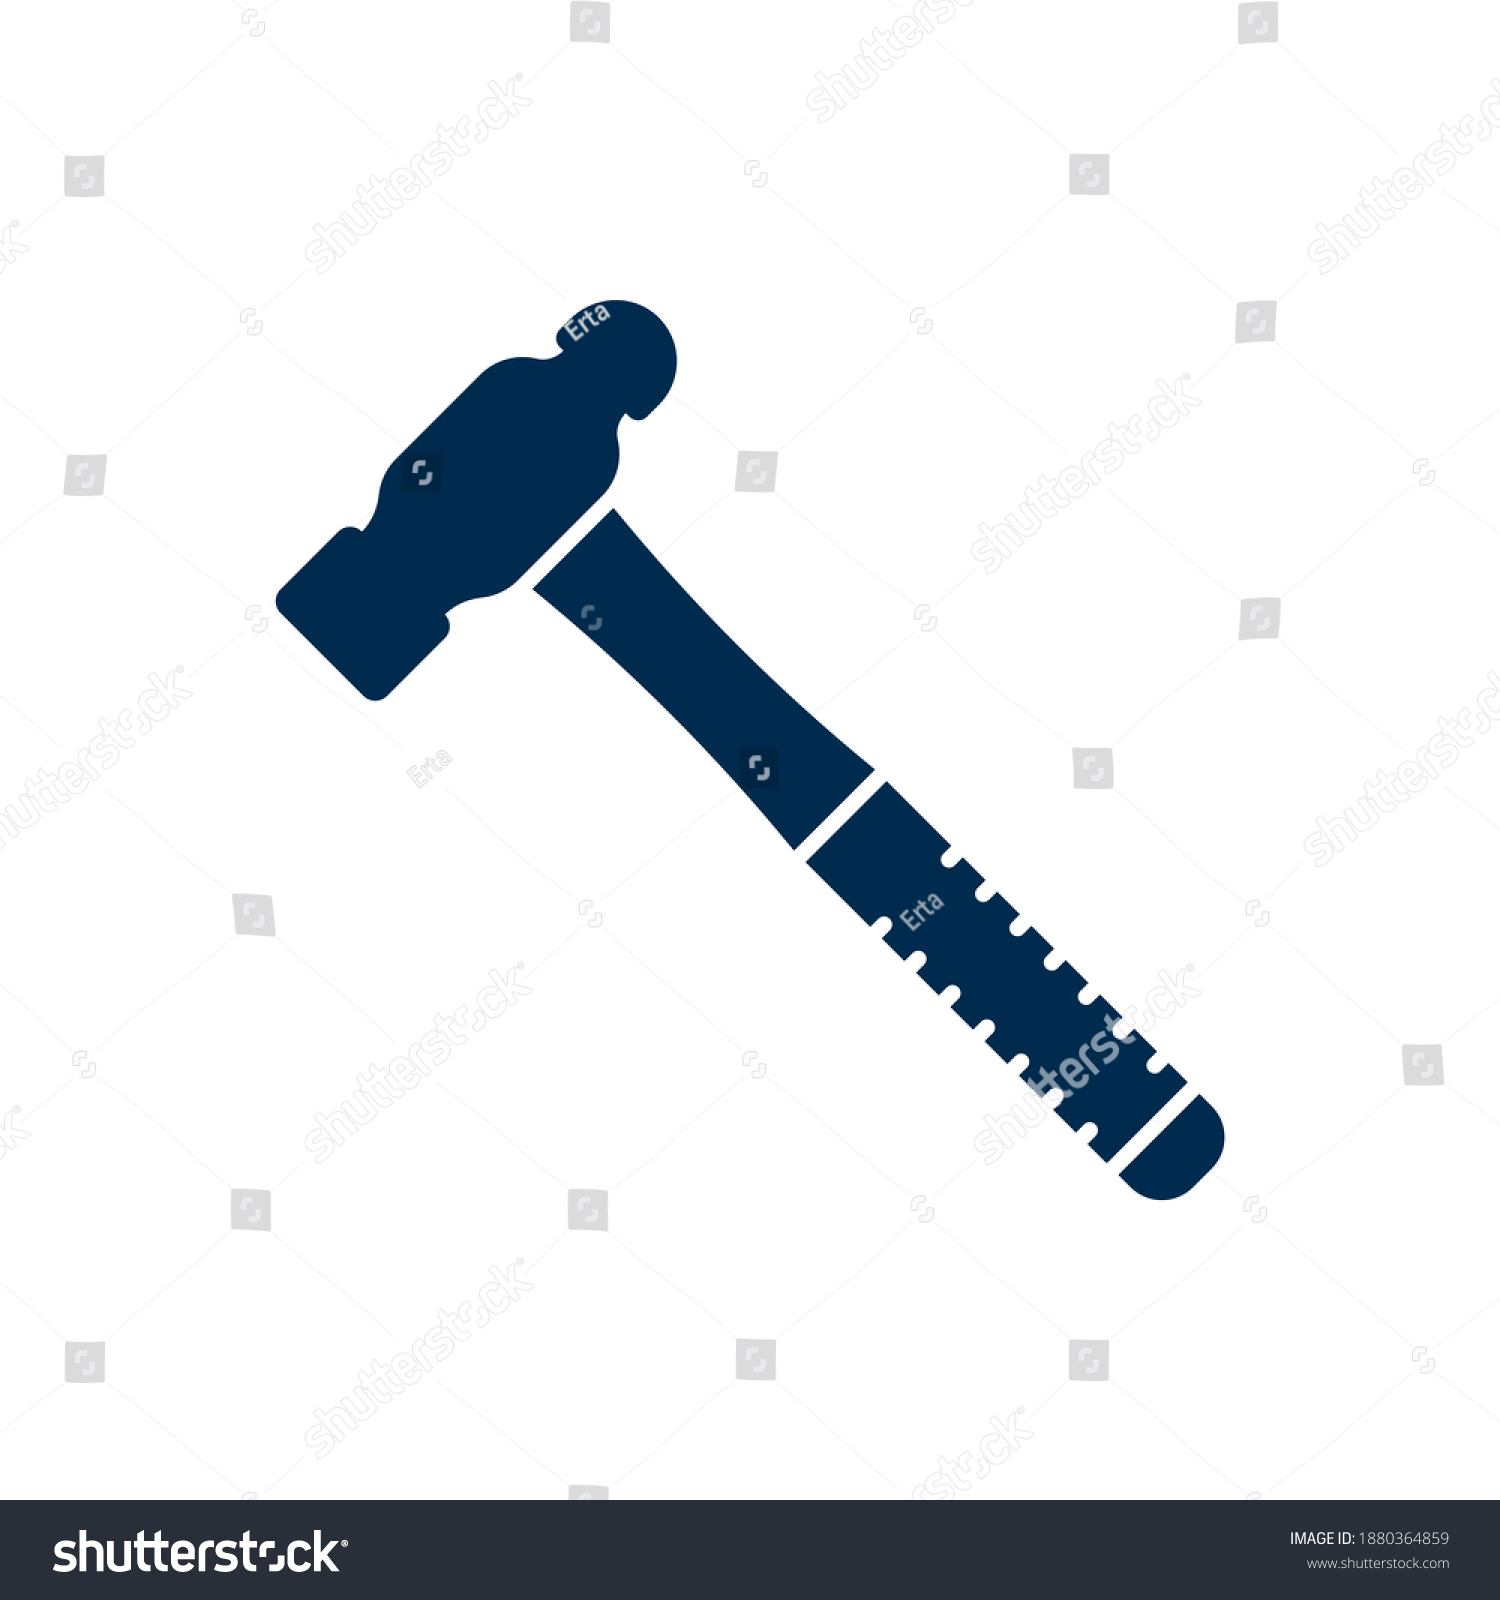 SVG of Ball pein hammer icon flat style isolated on white background. Vector illustration svg